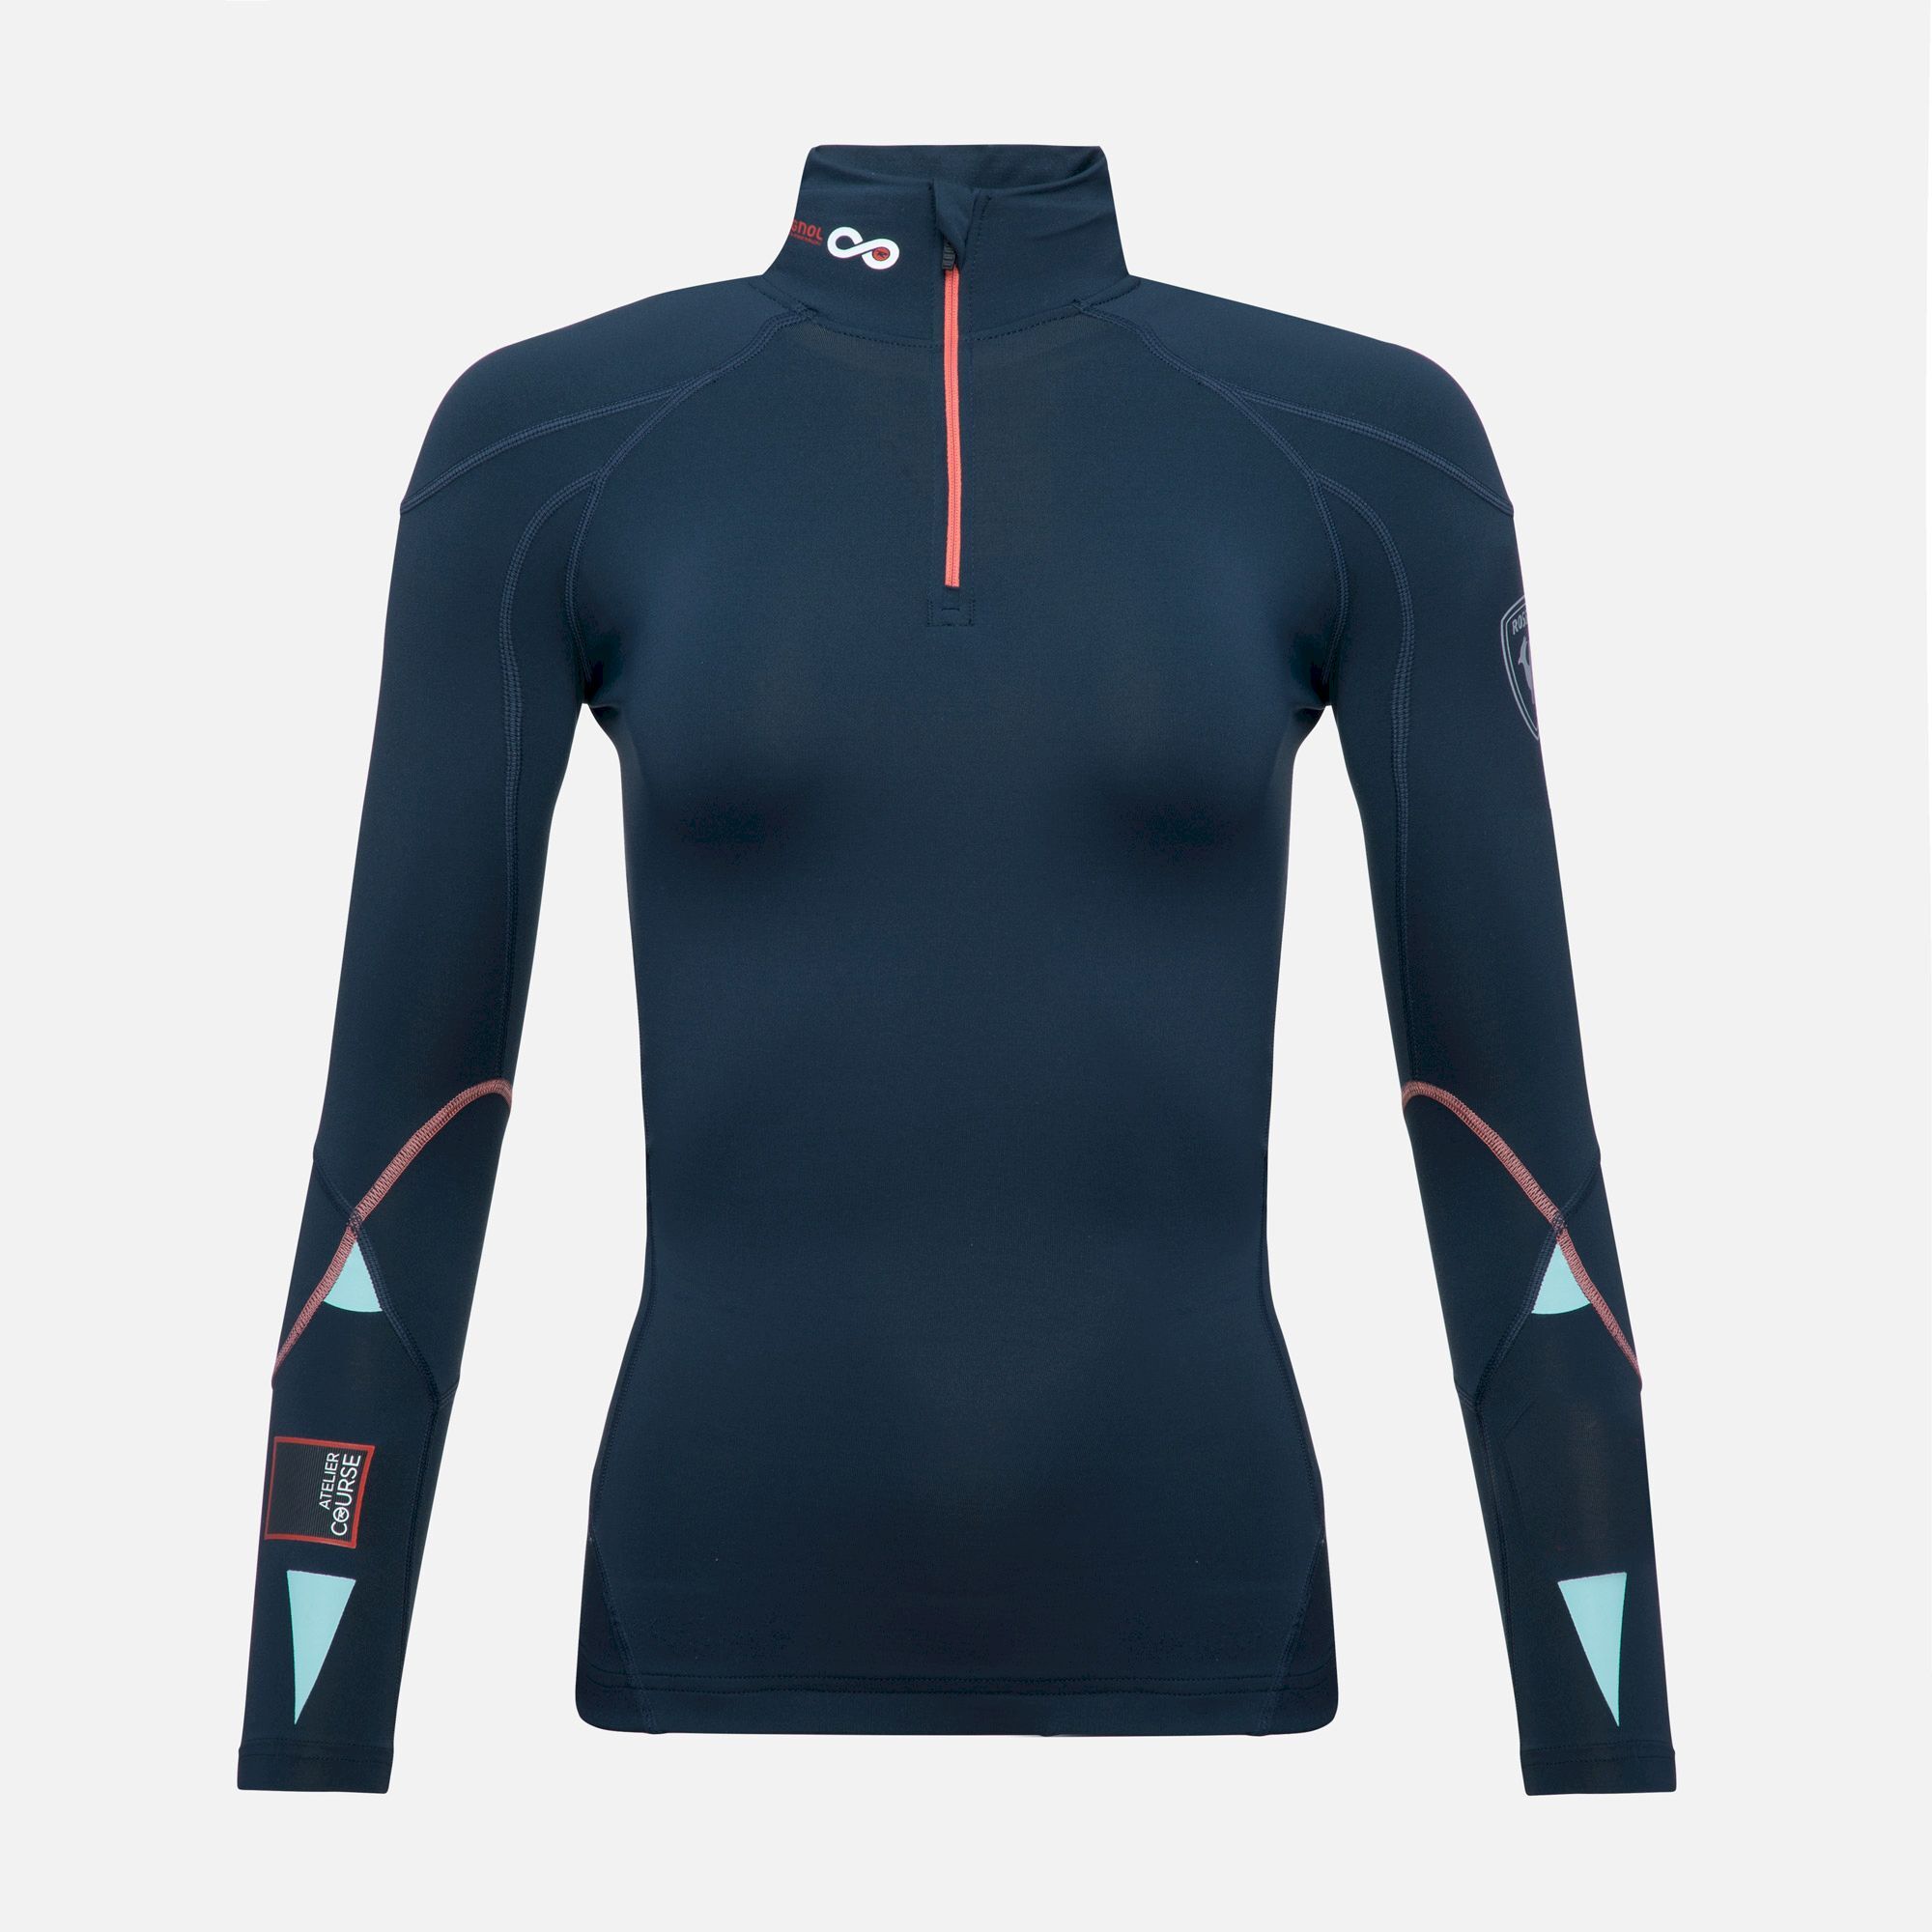 https://images.hardloop.fr/376548/rossignol-infini-compression-race-top-base-layer-womens.jpg?w=auto&h=auto&q=80